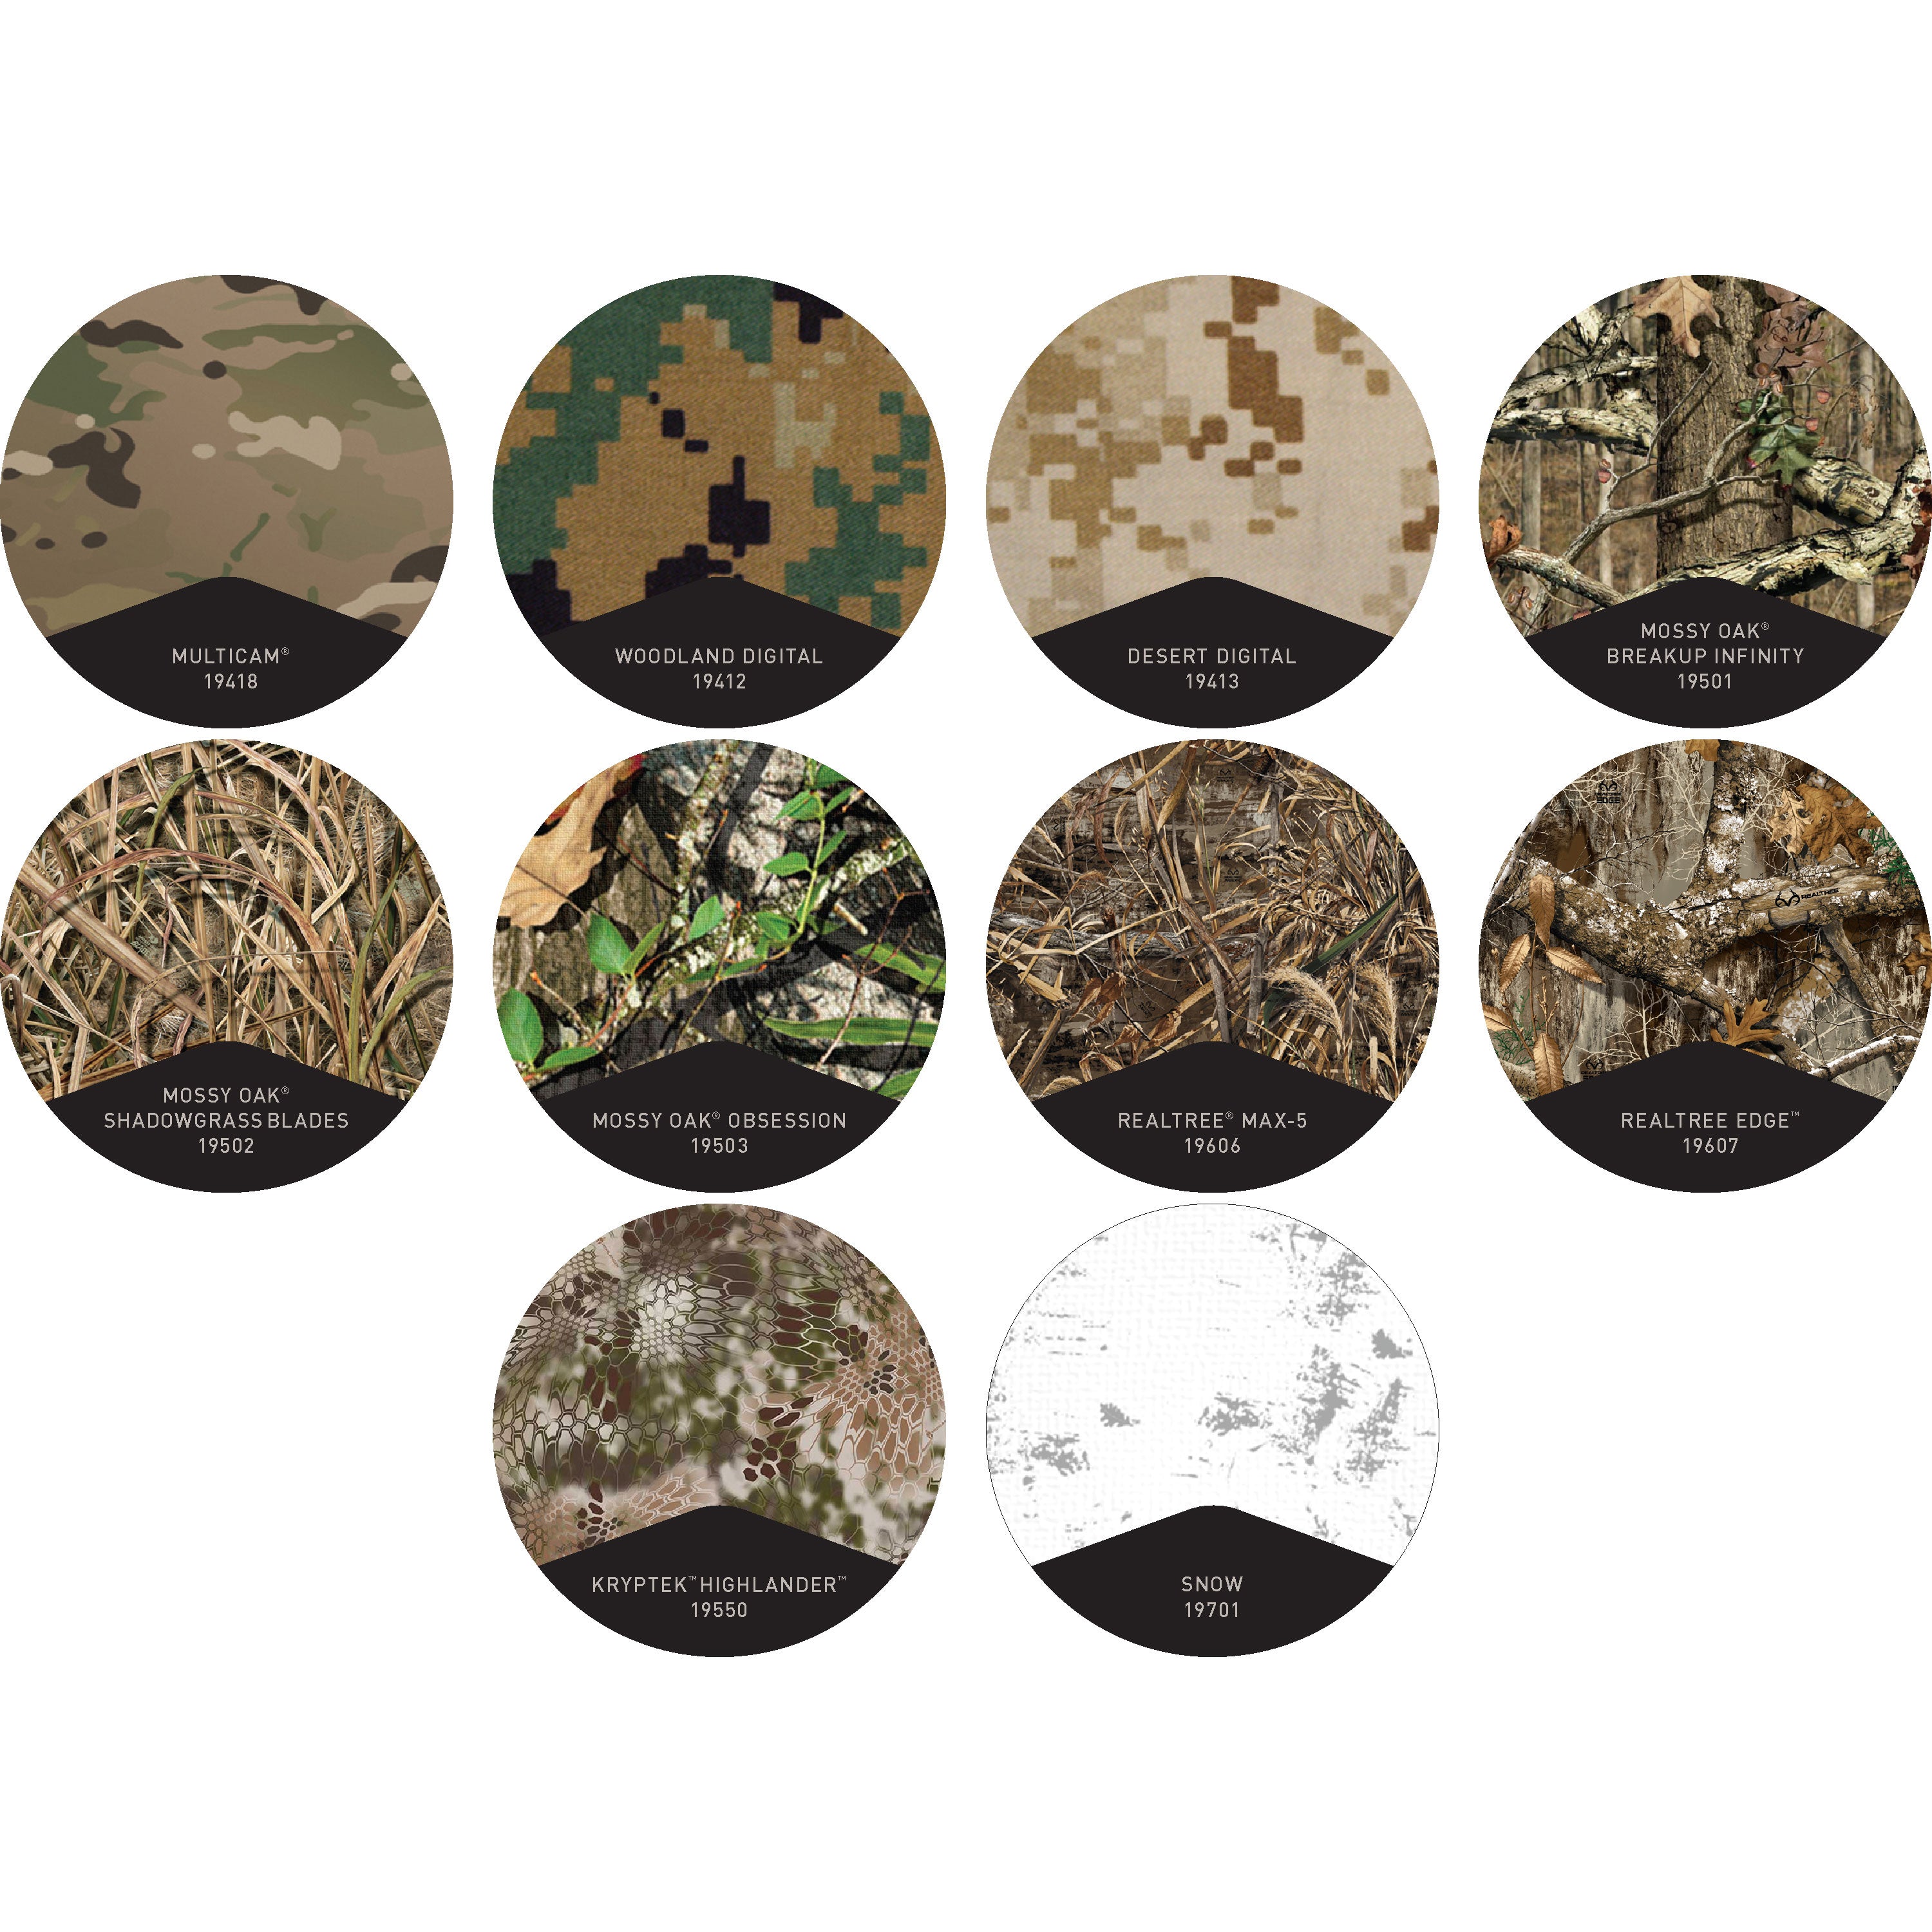 Camouflage Fabric and Its Application in Military Protective Clothing